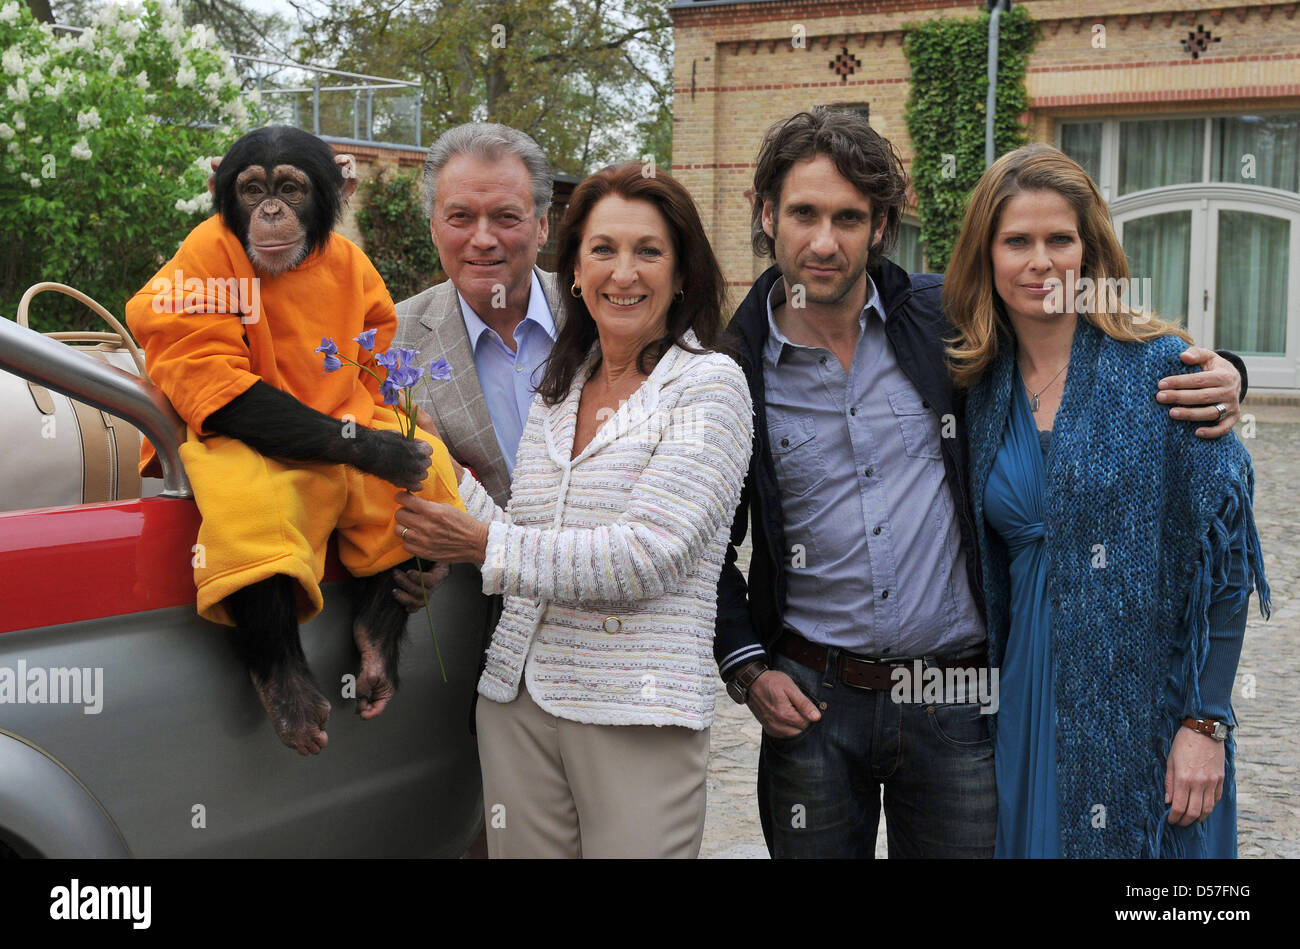 Ape Charly and cast members posieren die Schauspieler(L-R) Hans-Juergen Baeumler, Daniela Ziegler, Falk-Willy Wild and Ursula Buschhorn pose at the set in Stahnsdorf, Germany, 13 May 2010. German public braodcaster ZDF will shoot the 16th season of the popular series Unser Charly (Our Charly) until autumn 2010. Broadcasting is scheduled for 2011. Photo: Bernd Settnik Stock Photo